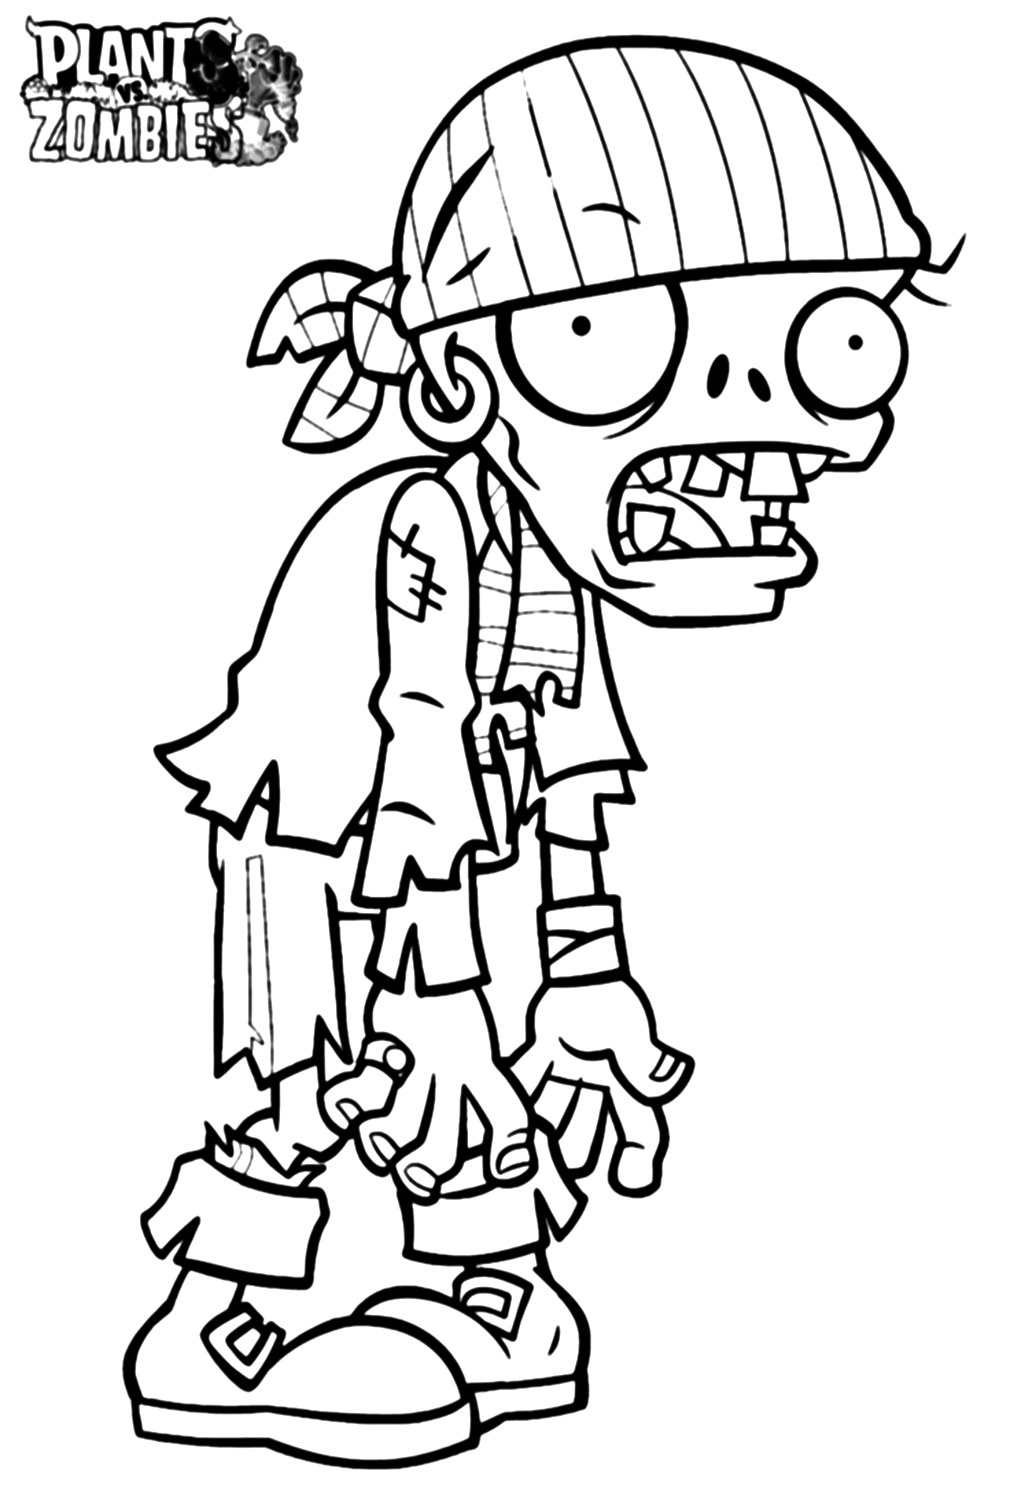 Pirate Zombie Coloring Page